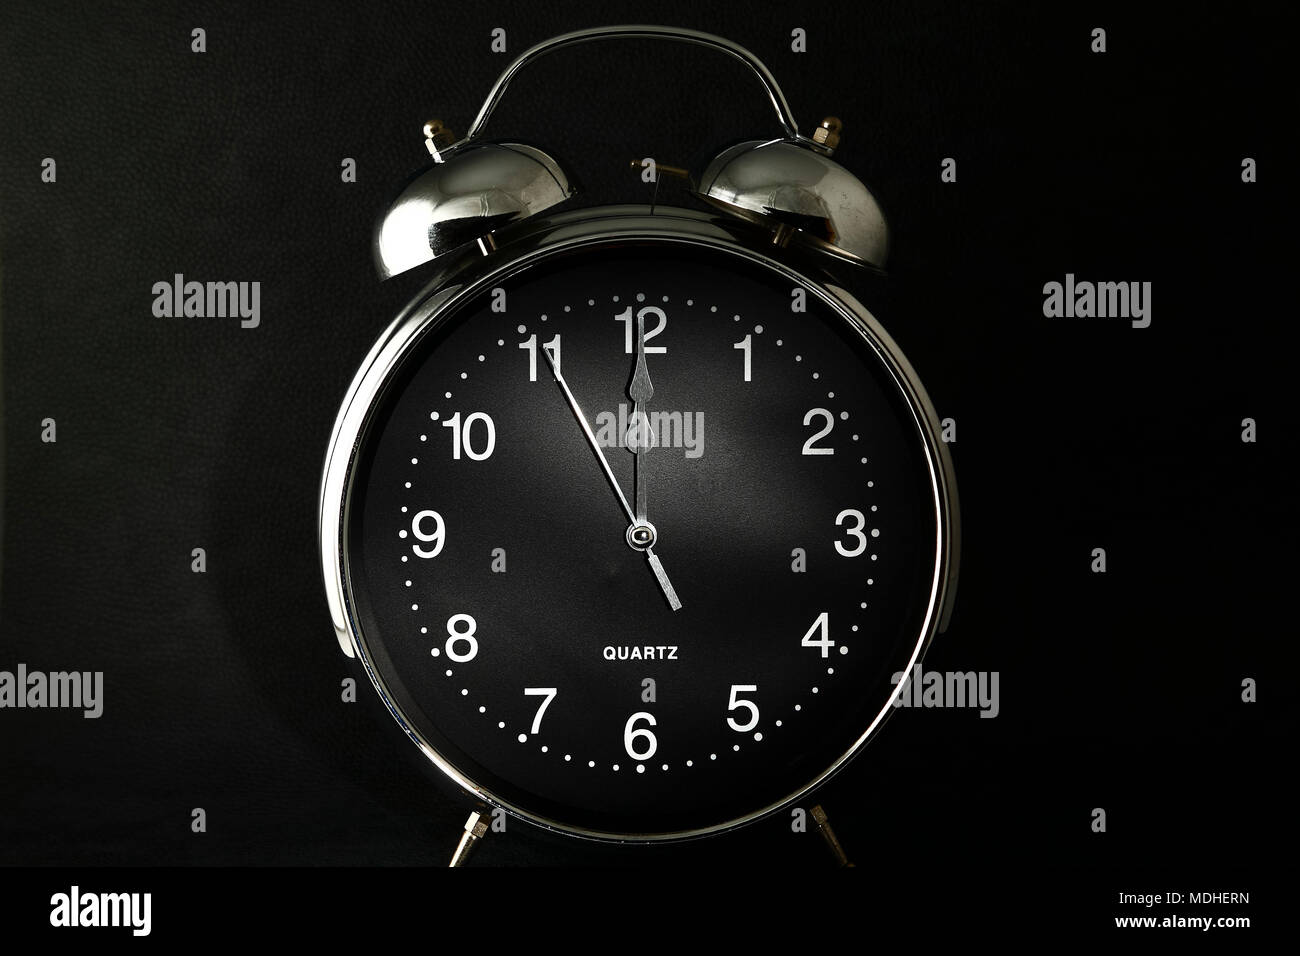 Old retro alarm clock with the hands set to 12:00 am or 12 pm Stock Photo